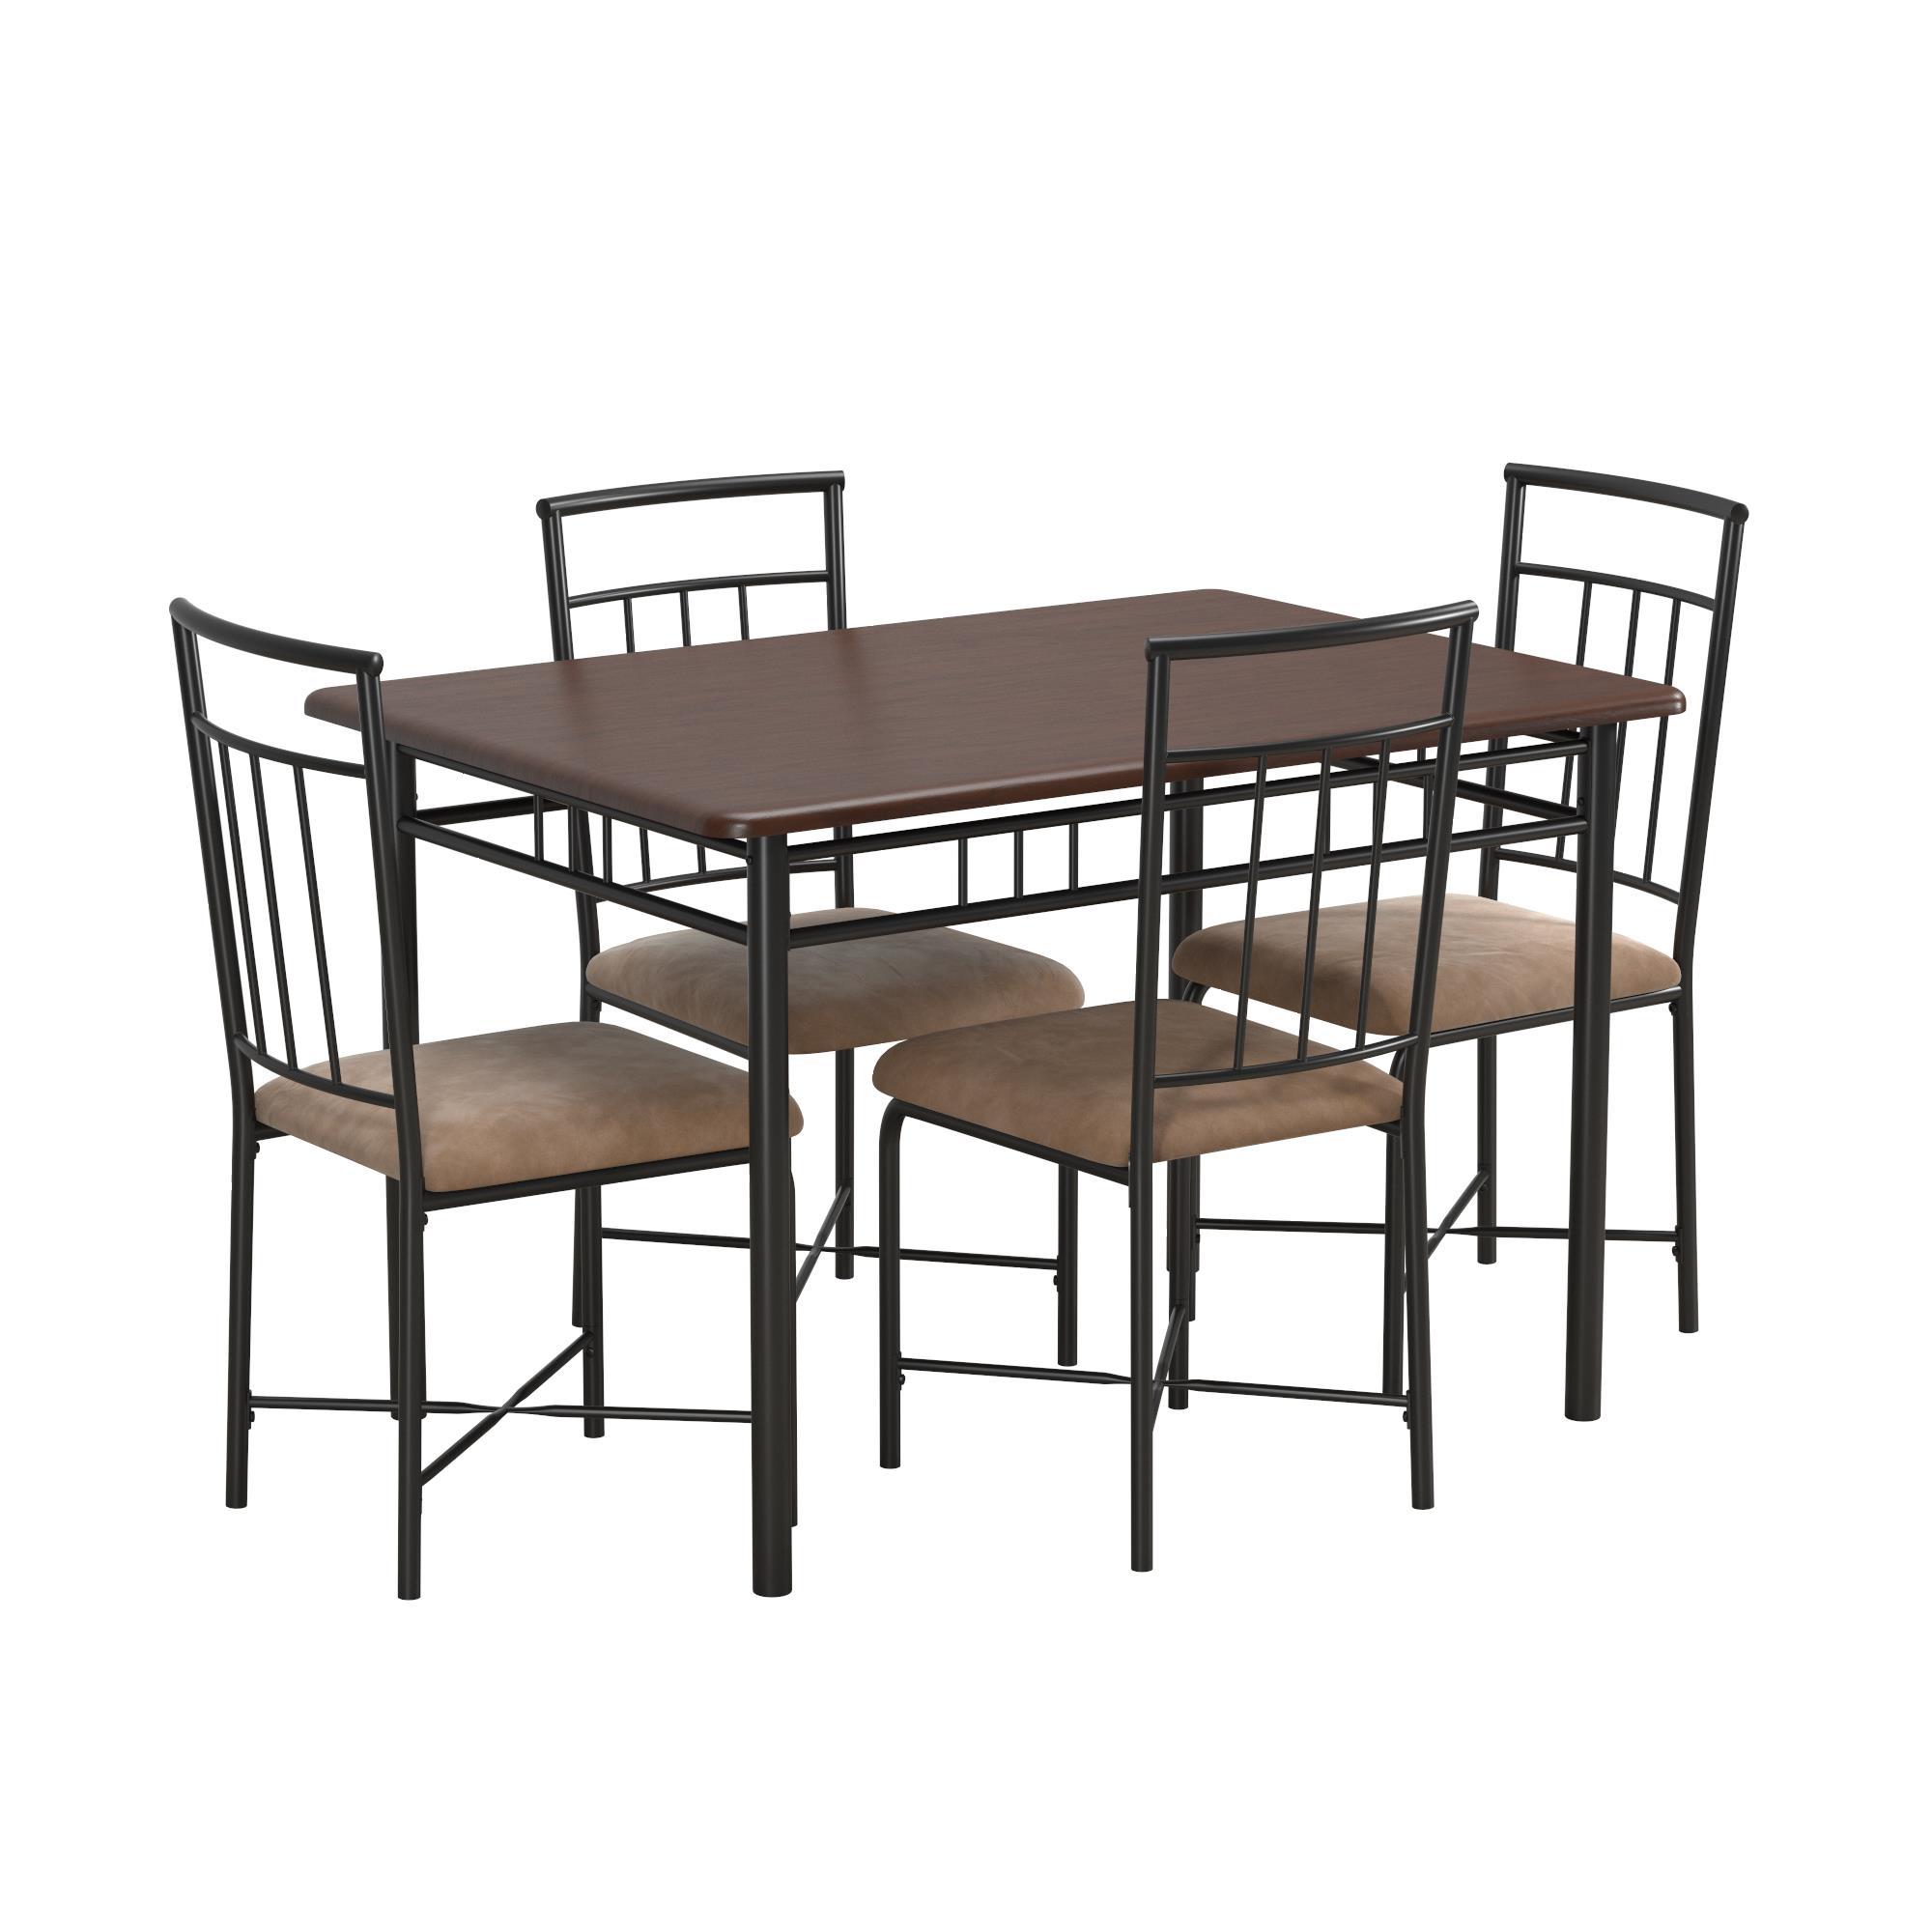 Mainstays Louise Traditional 5-Piece Wood & Metal Dining Set, Deep Walnut - image 4 of 22